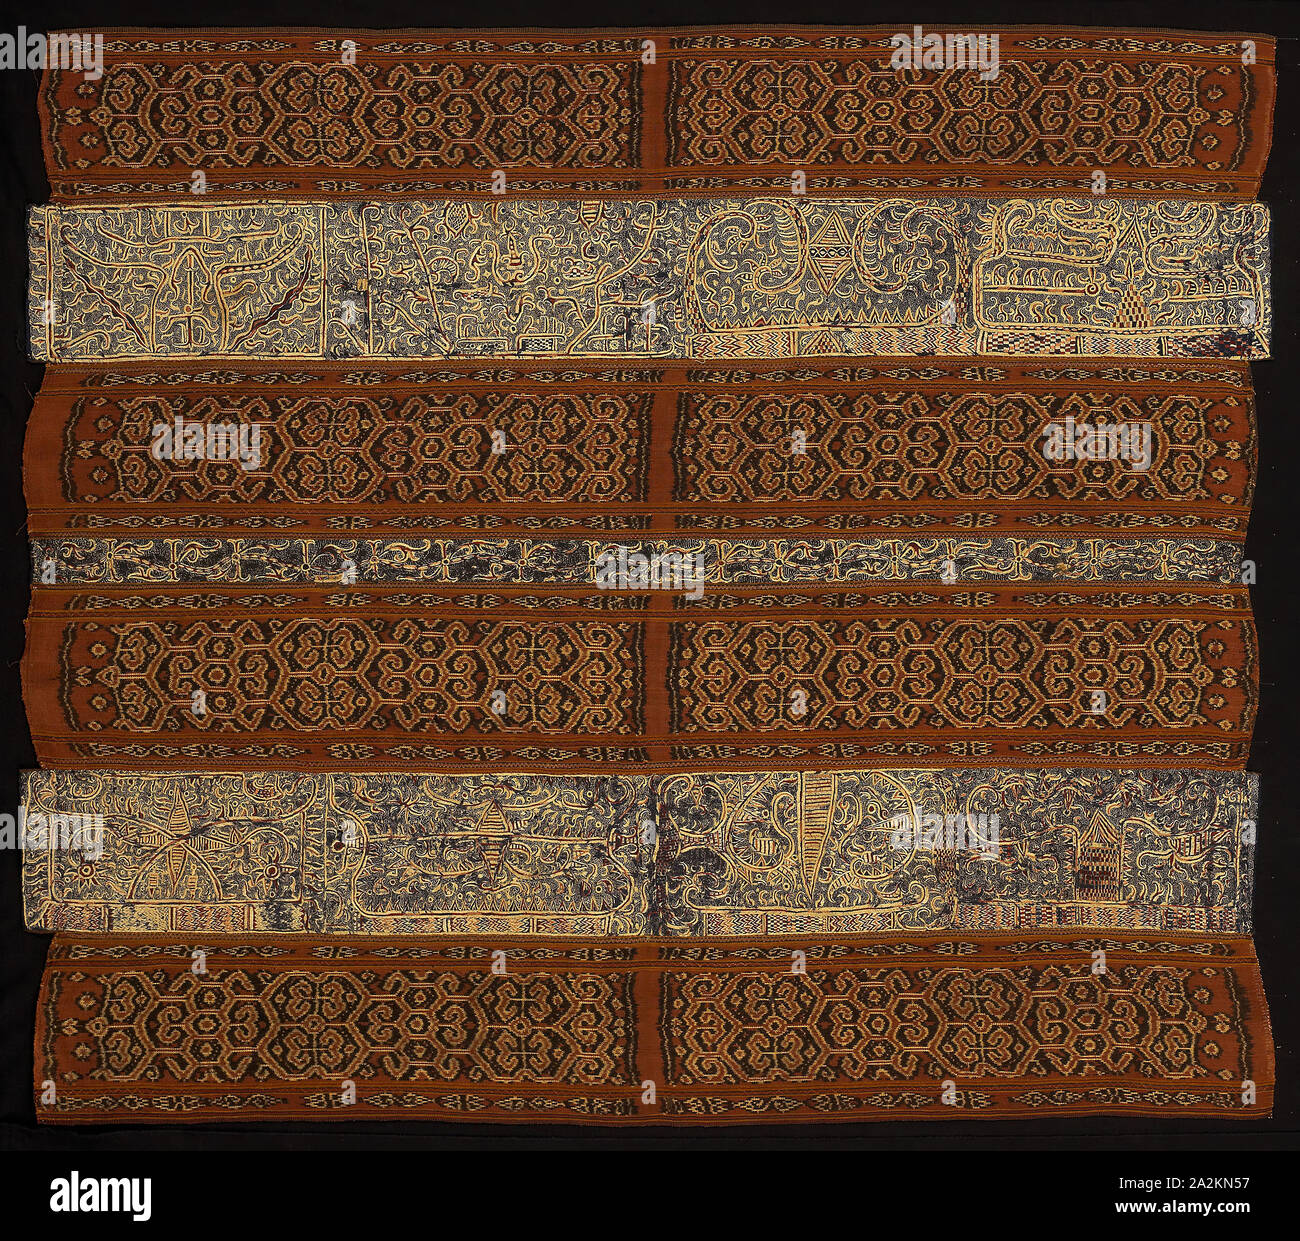 Woman’s Ceremonial Skirt (tapis), 18th century (?), Paminggir people, Indonesia, South Sumatra, Lampung area, Indonesia, Five panels joined: three panels of stripes of silk and cotton, warp resist dyed (warp ikat) plain weave (paired warps), stripes of warp-faced, weft ribbed plain weave with supplementary brocading wefts and one stripe of cotton, plain weave, embroidered with silk in back, double running, stem and surface satin stitches and two panels of cotton, plain weave, embroidered with silk in back, stem and surface satin stitches, 138.6 x 121.8 cm (54 1/2 x 47 7/8 in Stock Photo